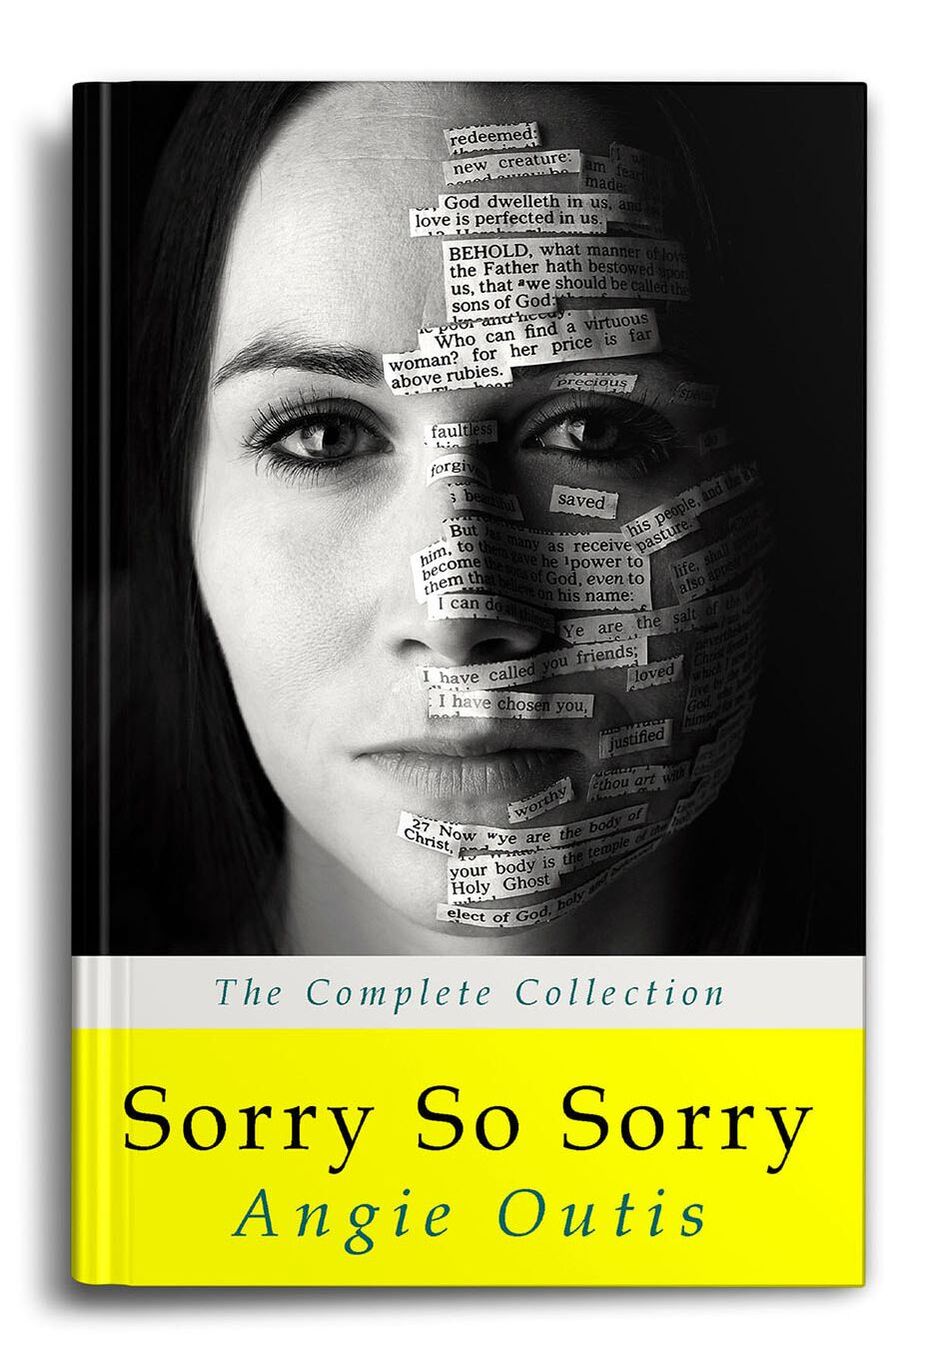 Sorry So Sorry - Angie Outis